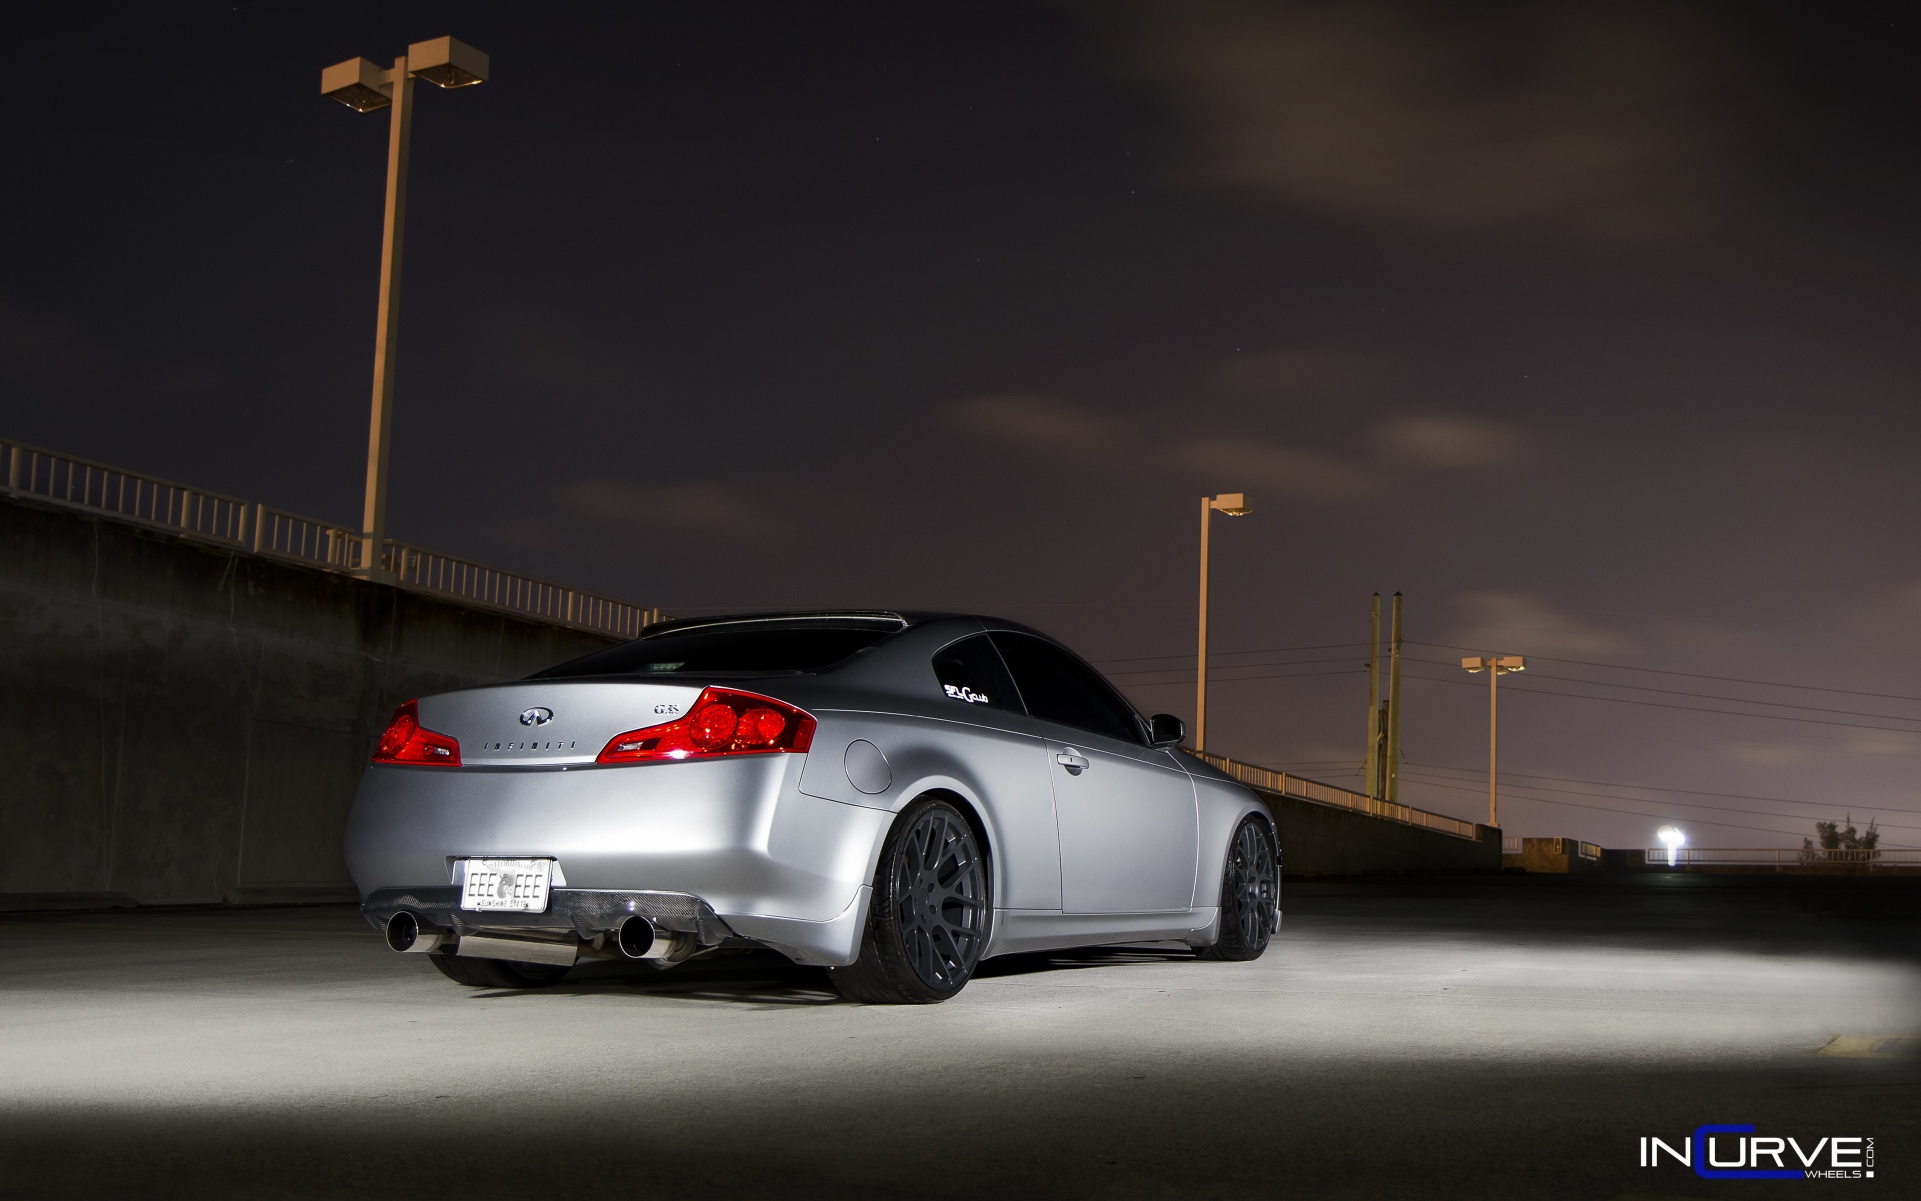 Hot Trends Today84977 Infiniti G35 Coupe Custom Wallpaper Image